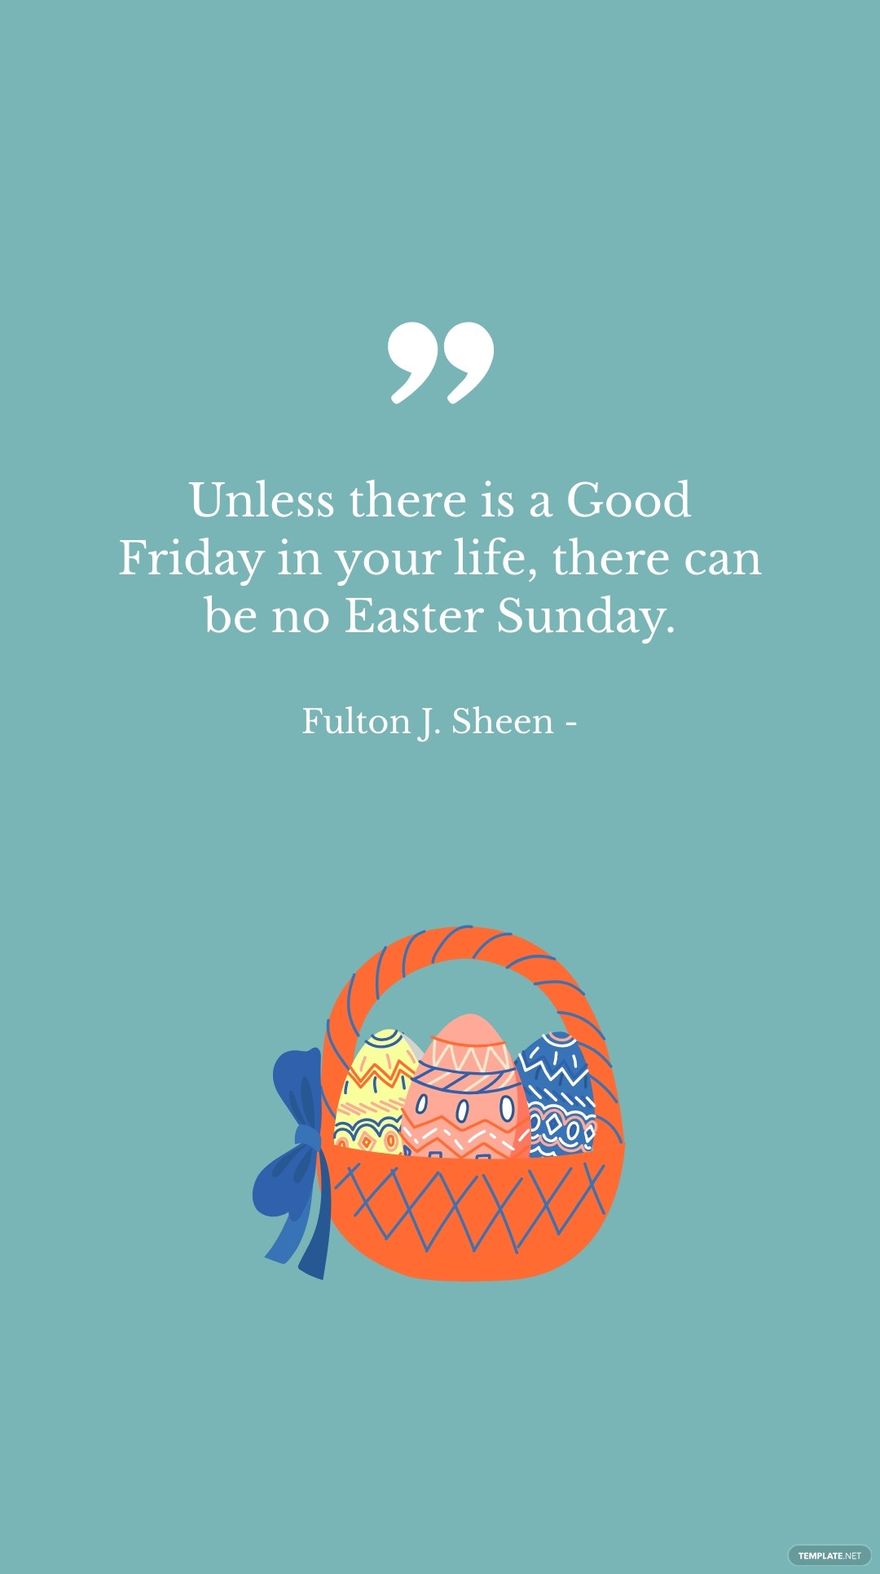 Free Fulton J. Sheen - Unless there is a Good Friday in your life, there can be no Easter Sunday. in JPG